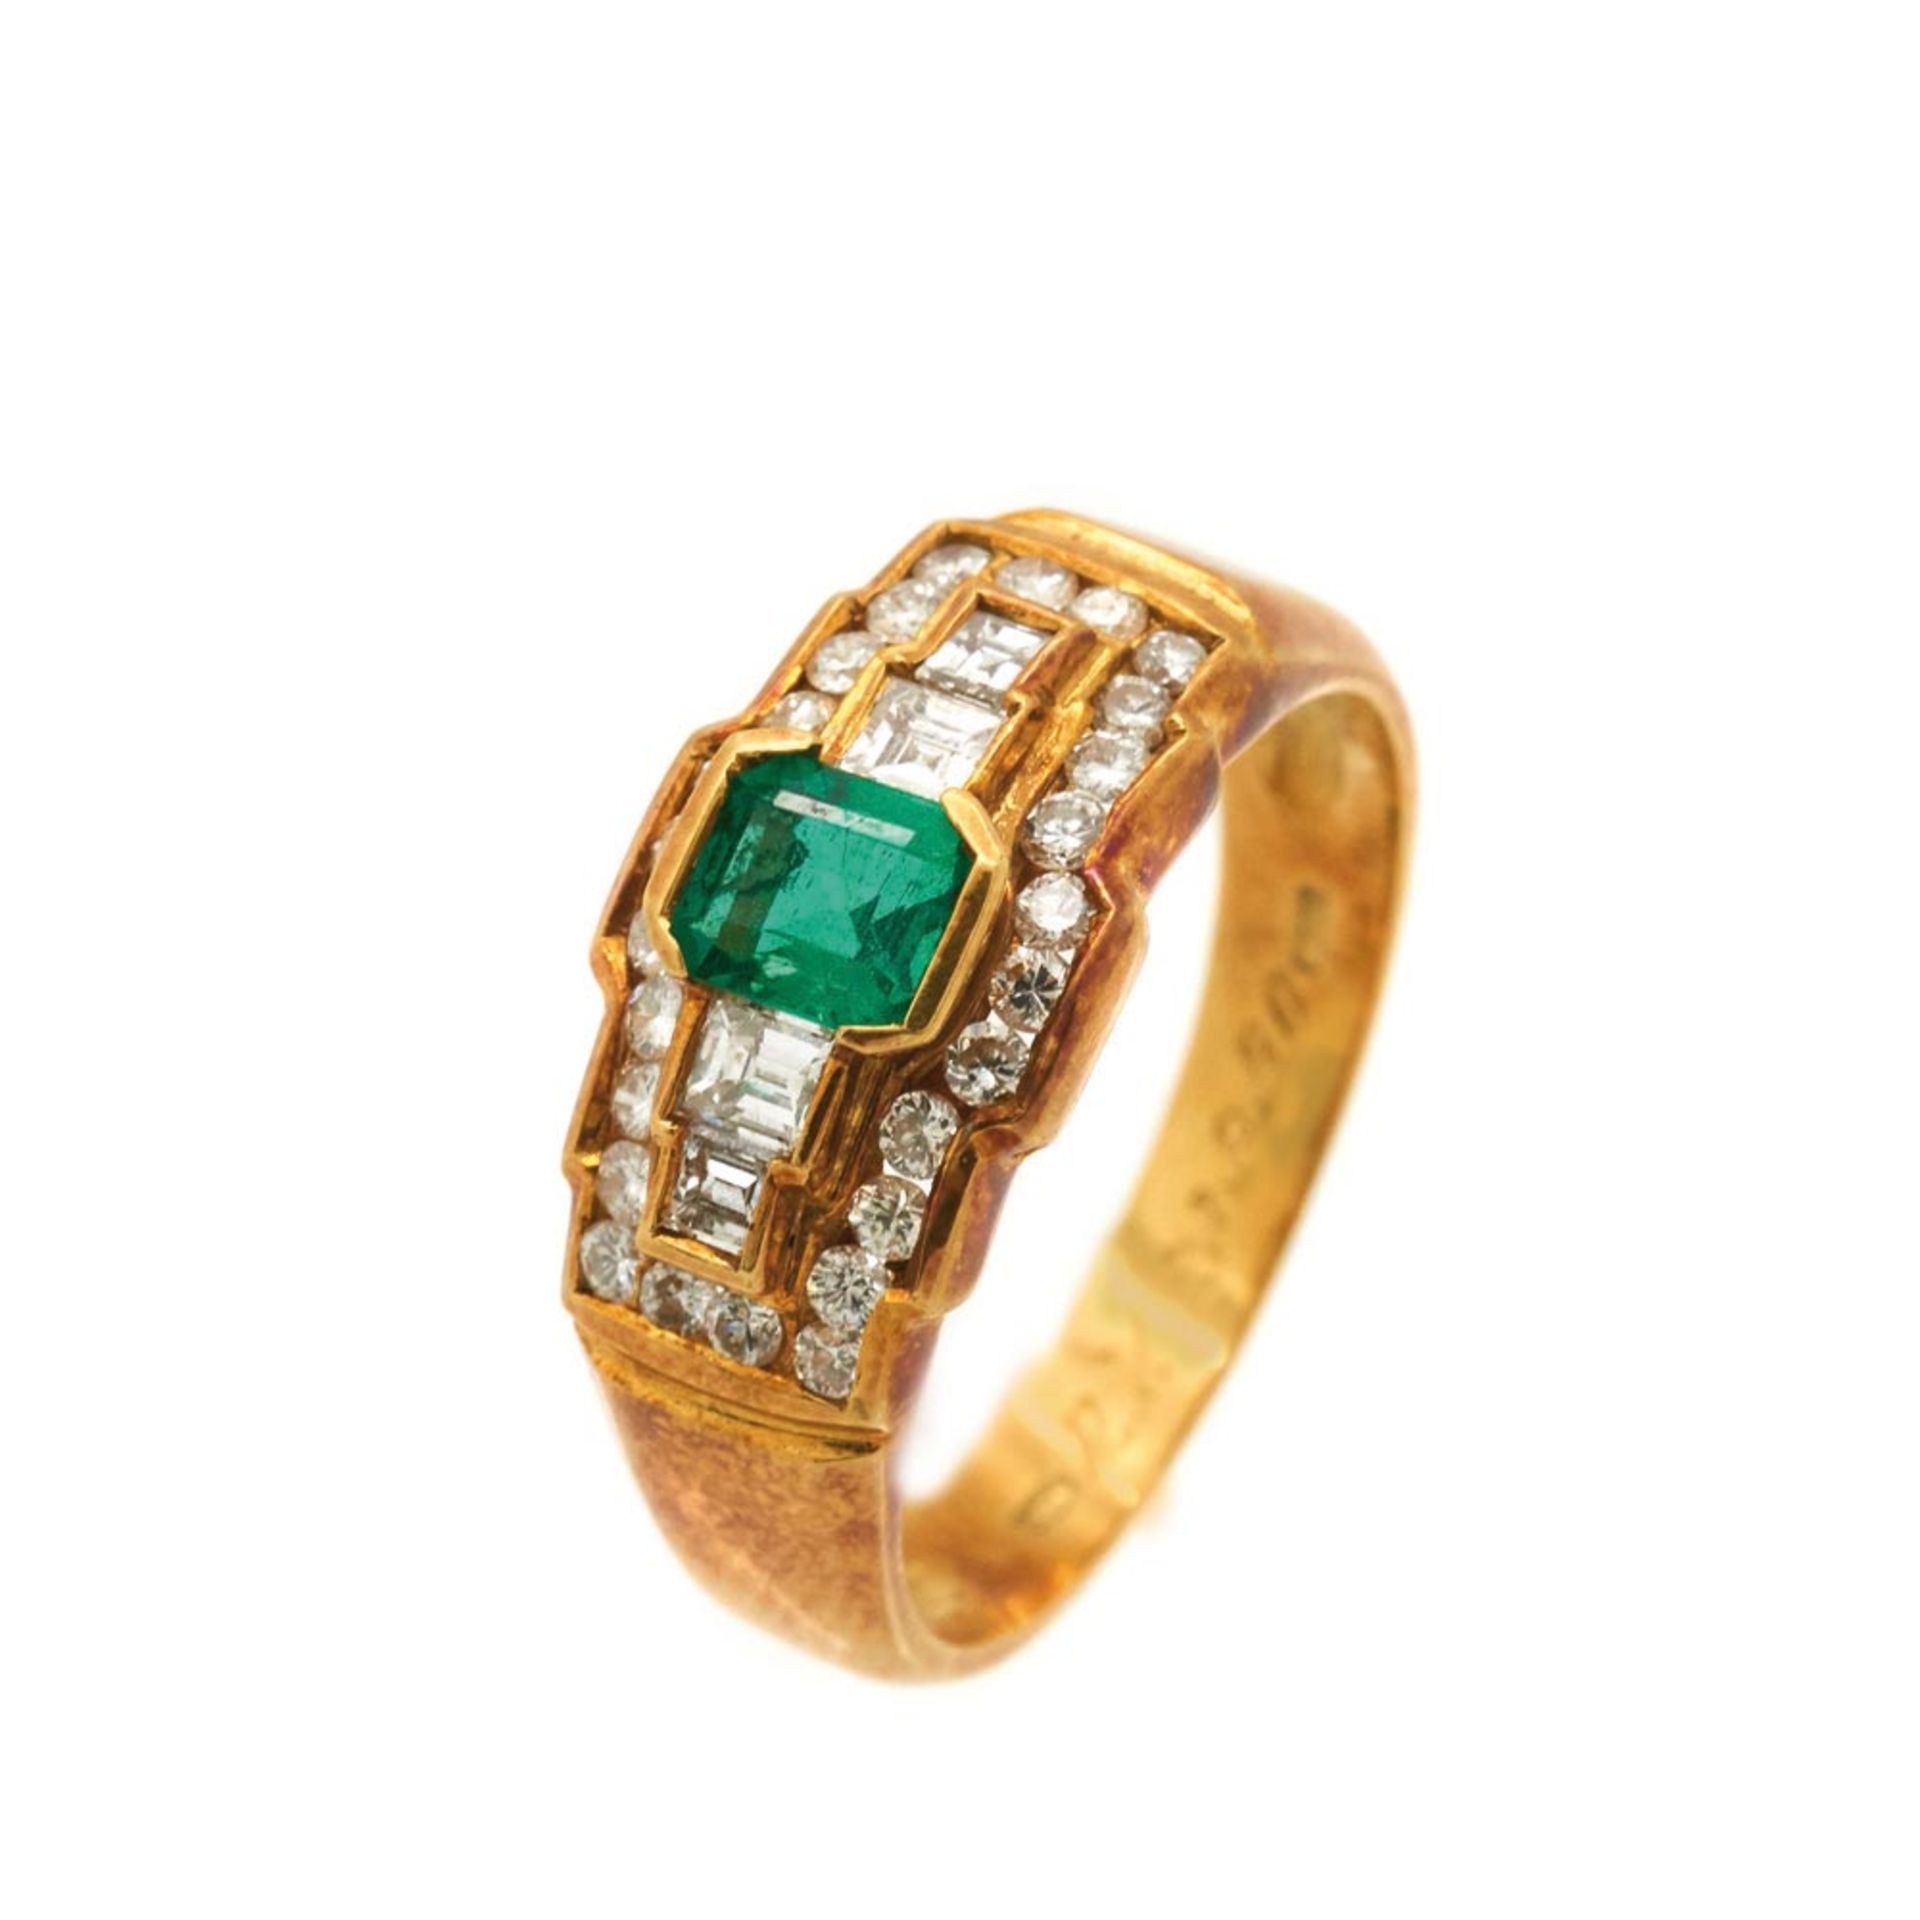 Gold, emerald and diamonds ring